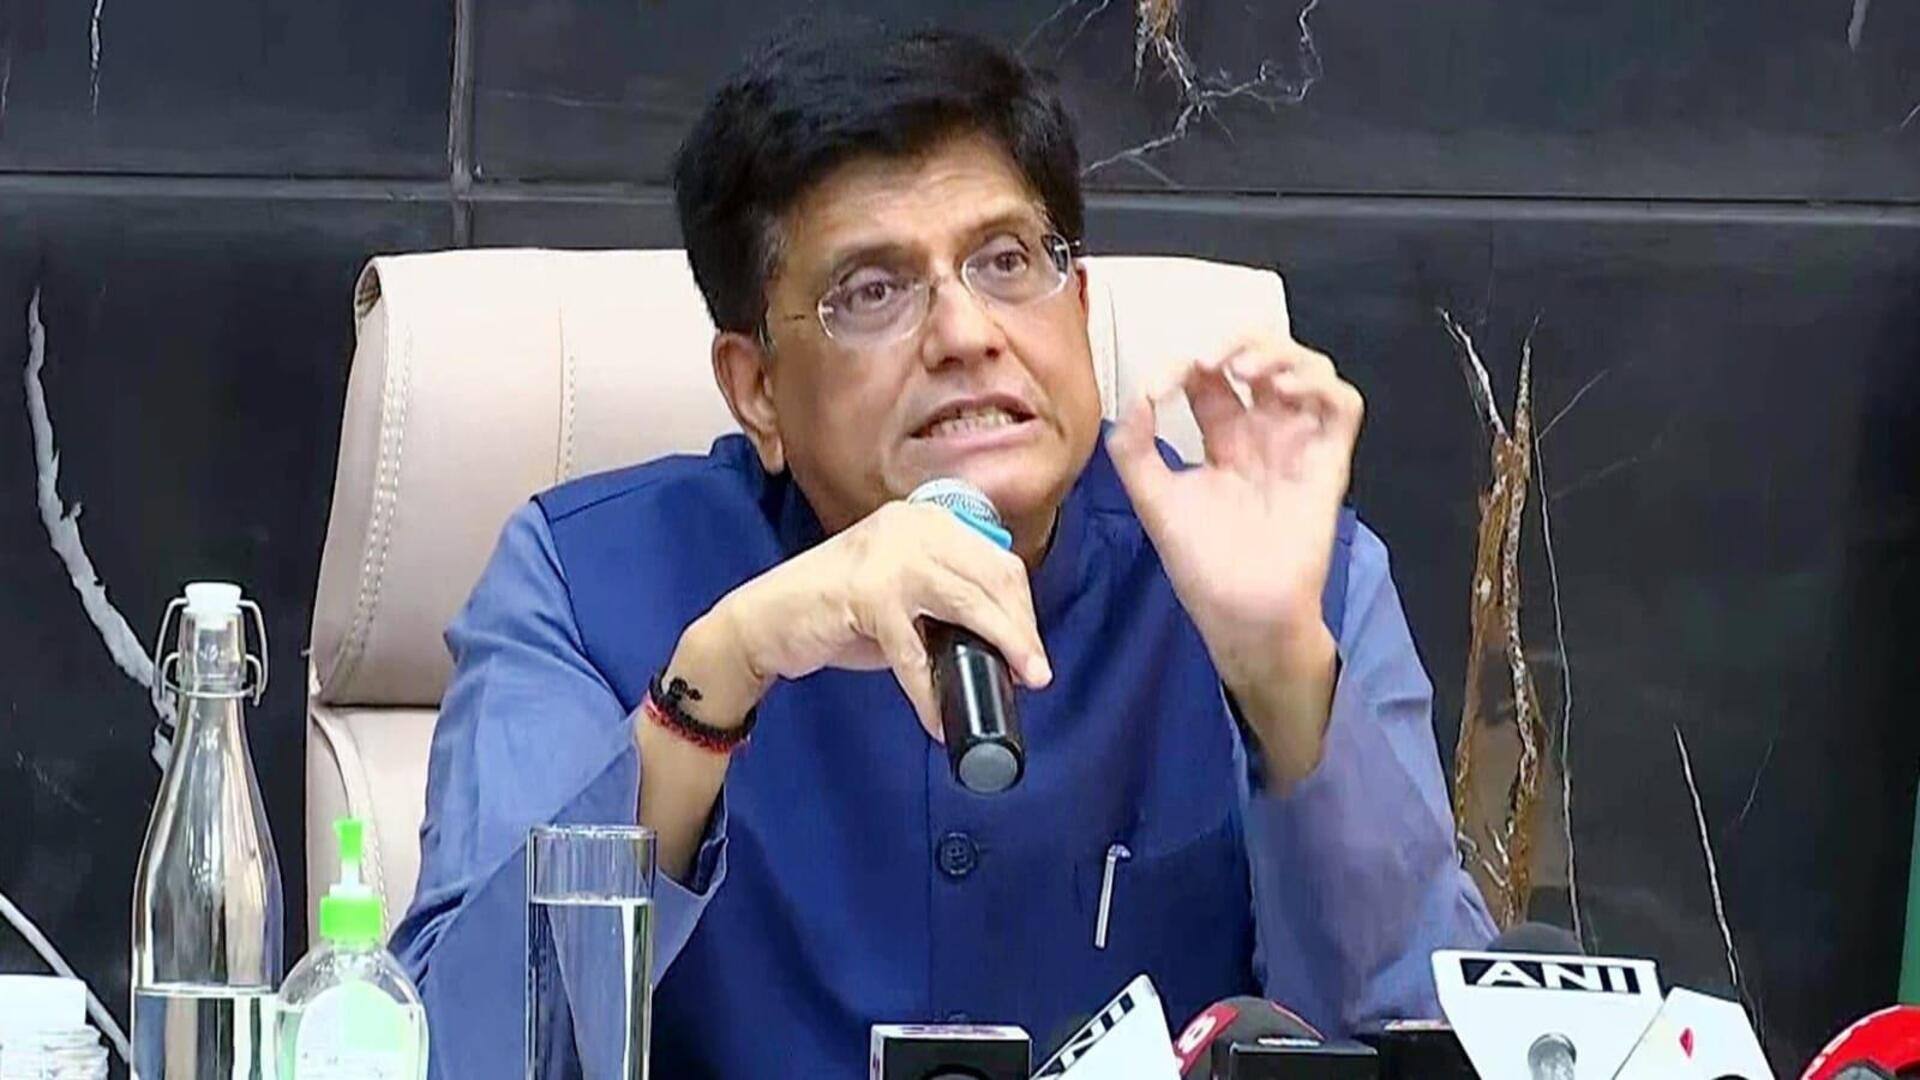 India to become $4tn economy before 2024 elections: Piyush Goyal